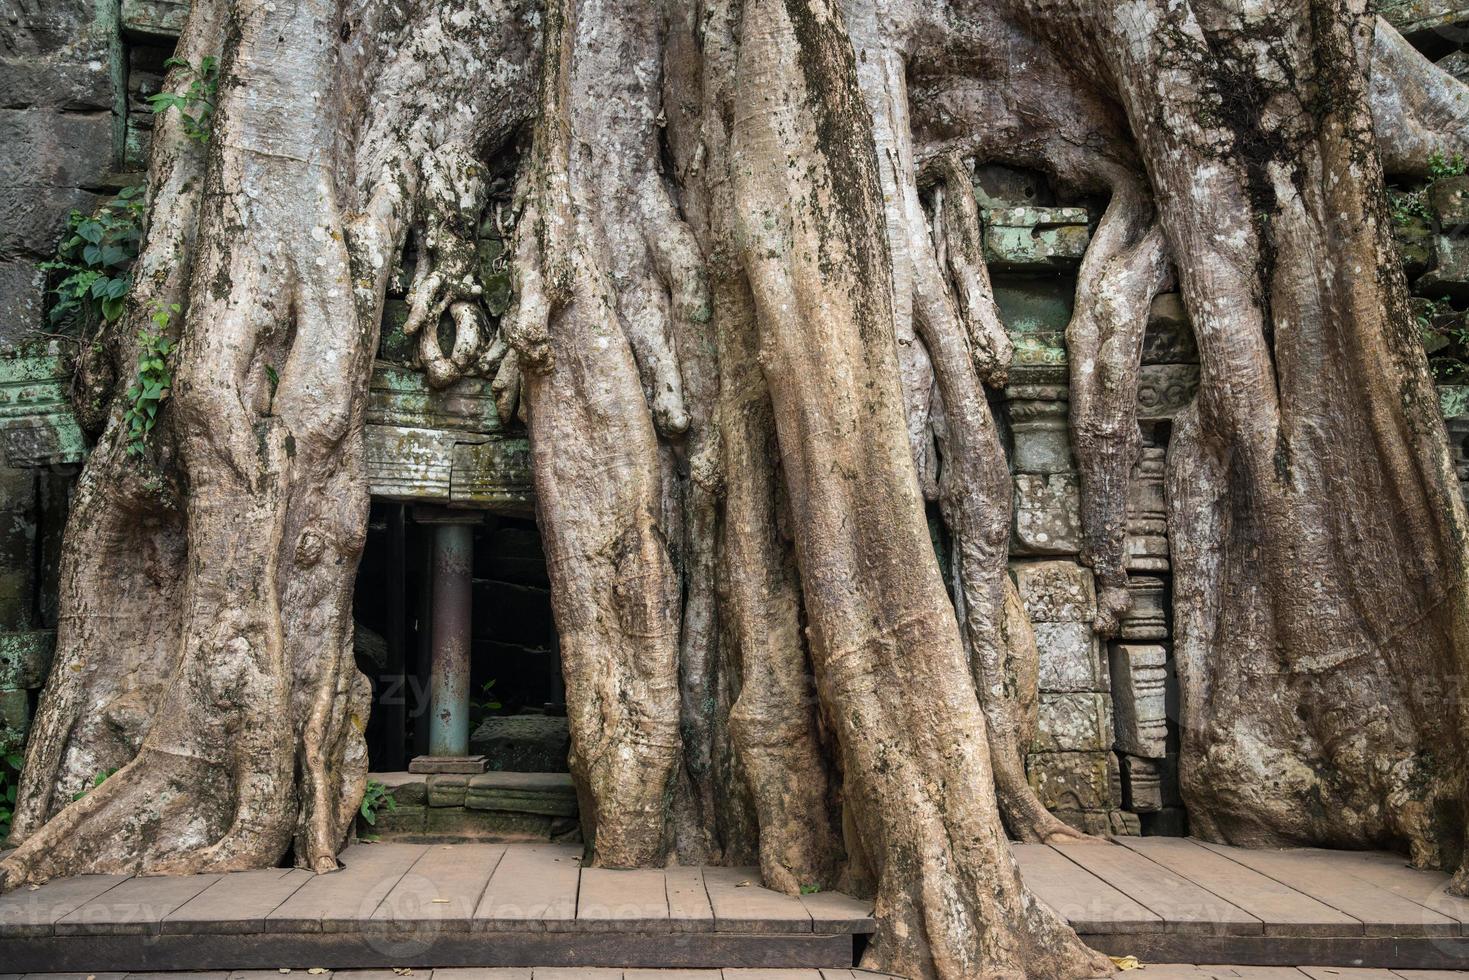 Roots of a giant Spung tree covered on Ta Prohm temple in Siem Reap, Cambodia. photo